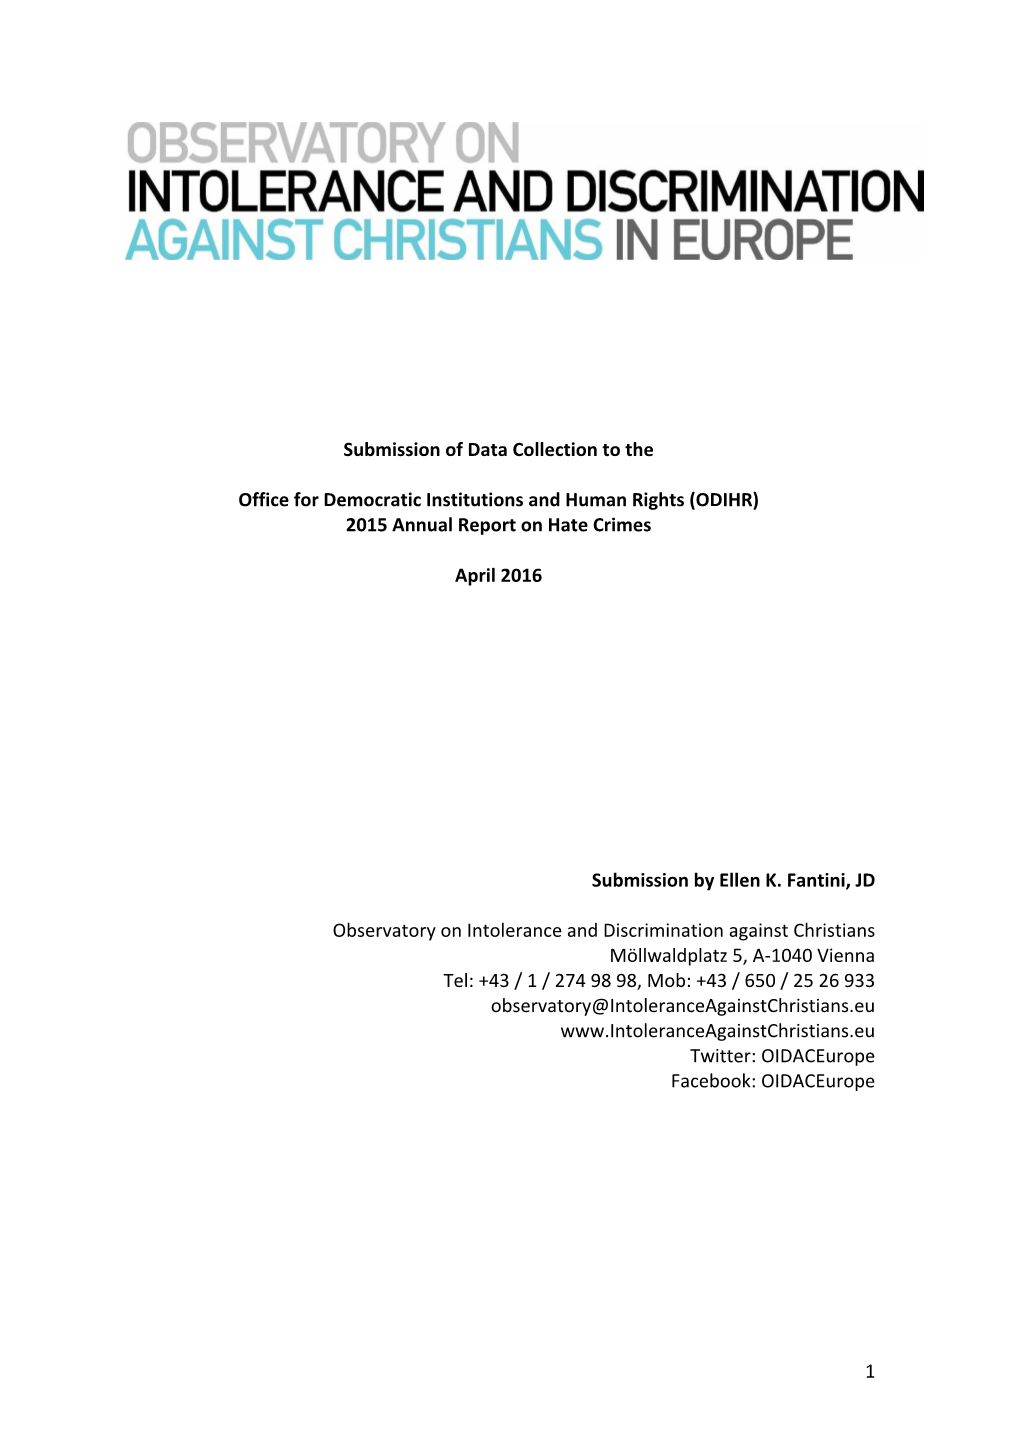 ODIHR Hate Crimes Report Submission Observatory 2015